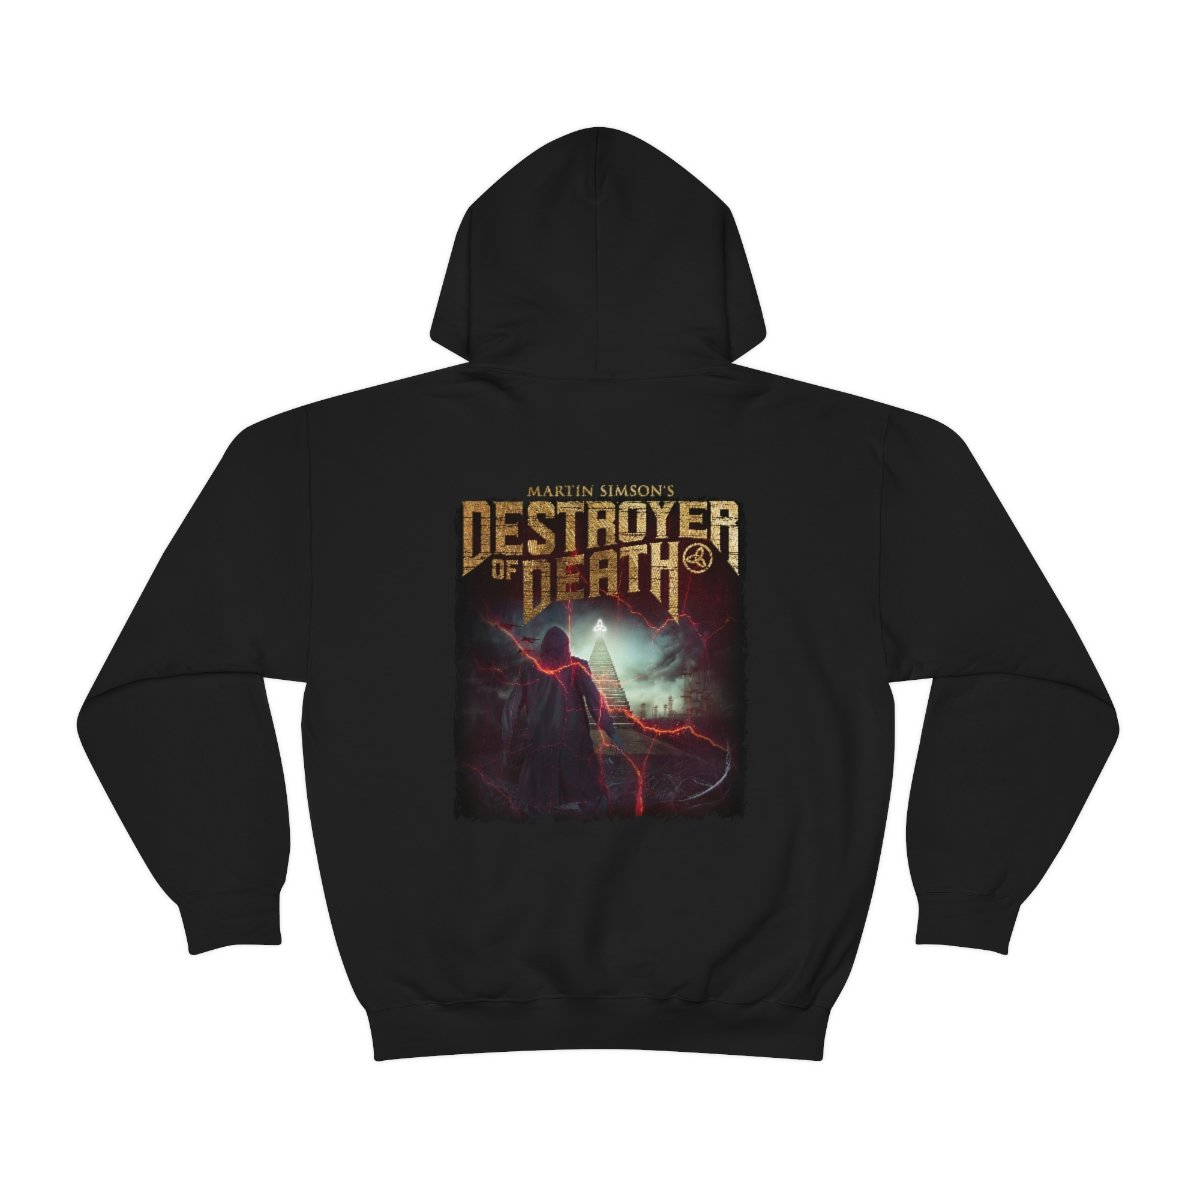 Martin Simson’s Destroyer of Death – Master of All (Version 2) Pullover Hooded Sweatshirt